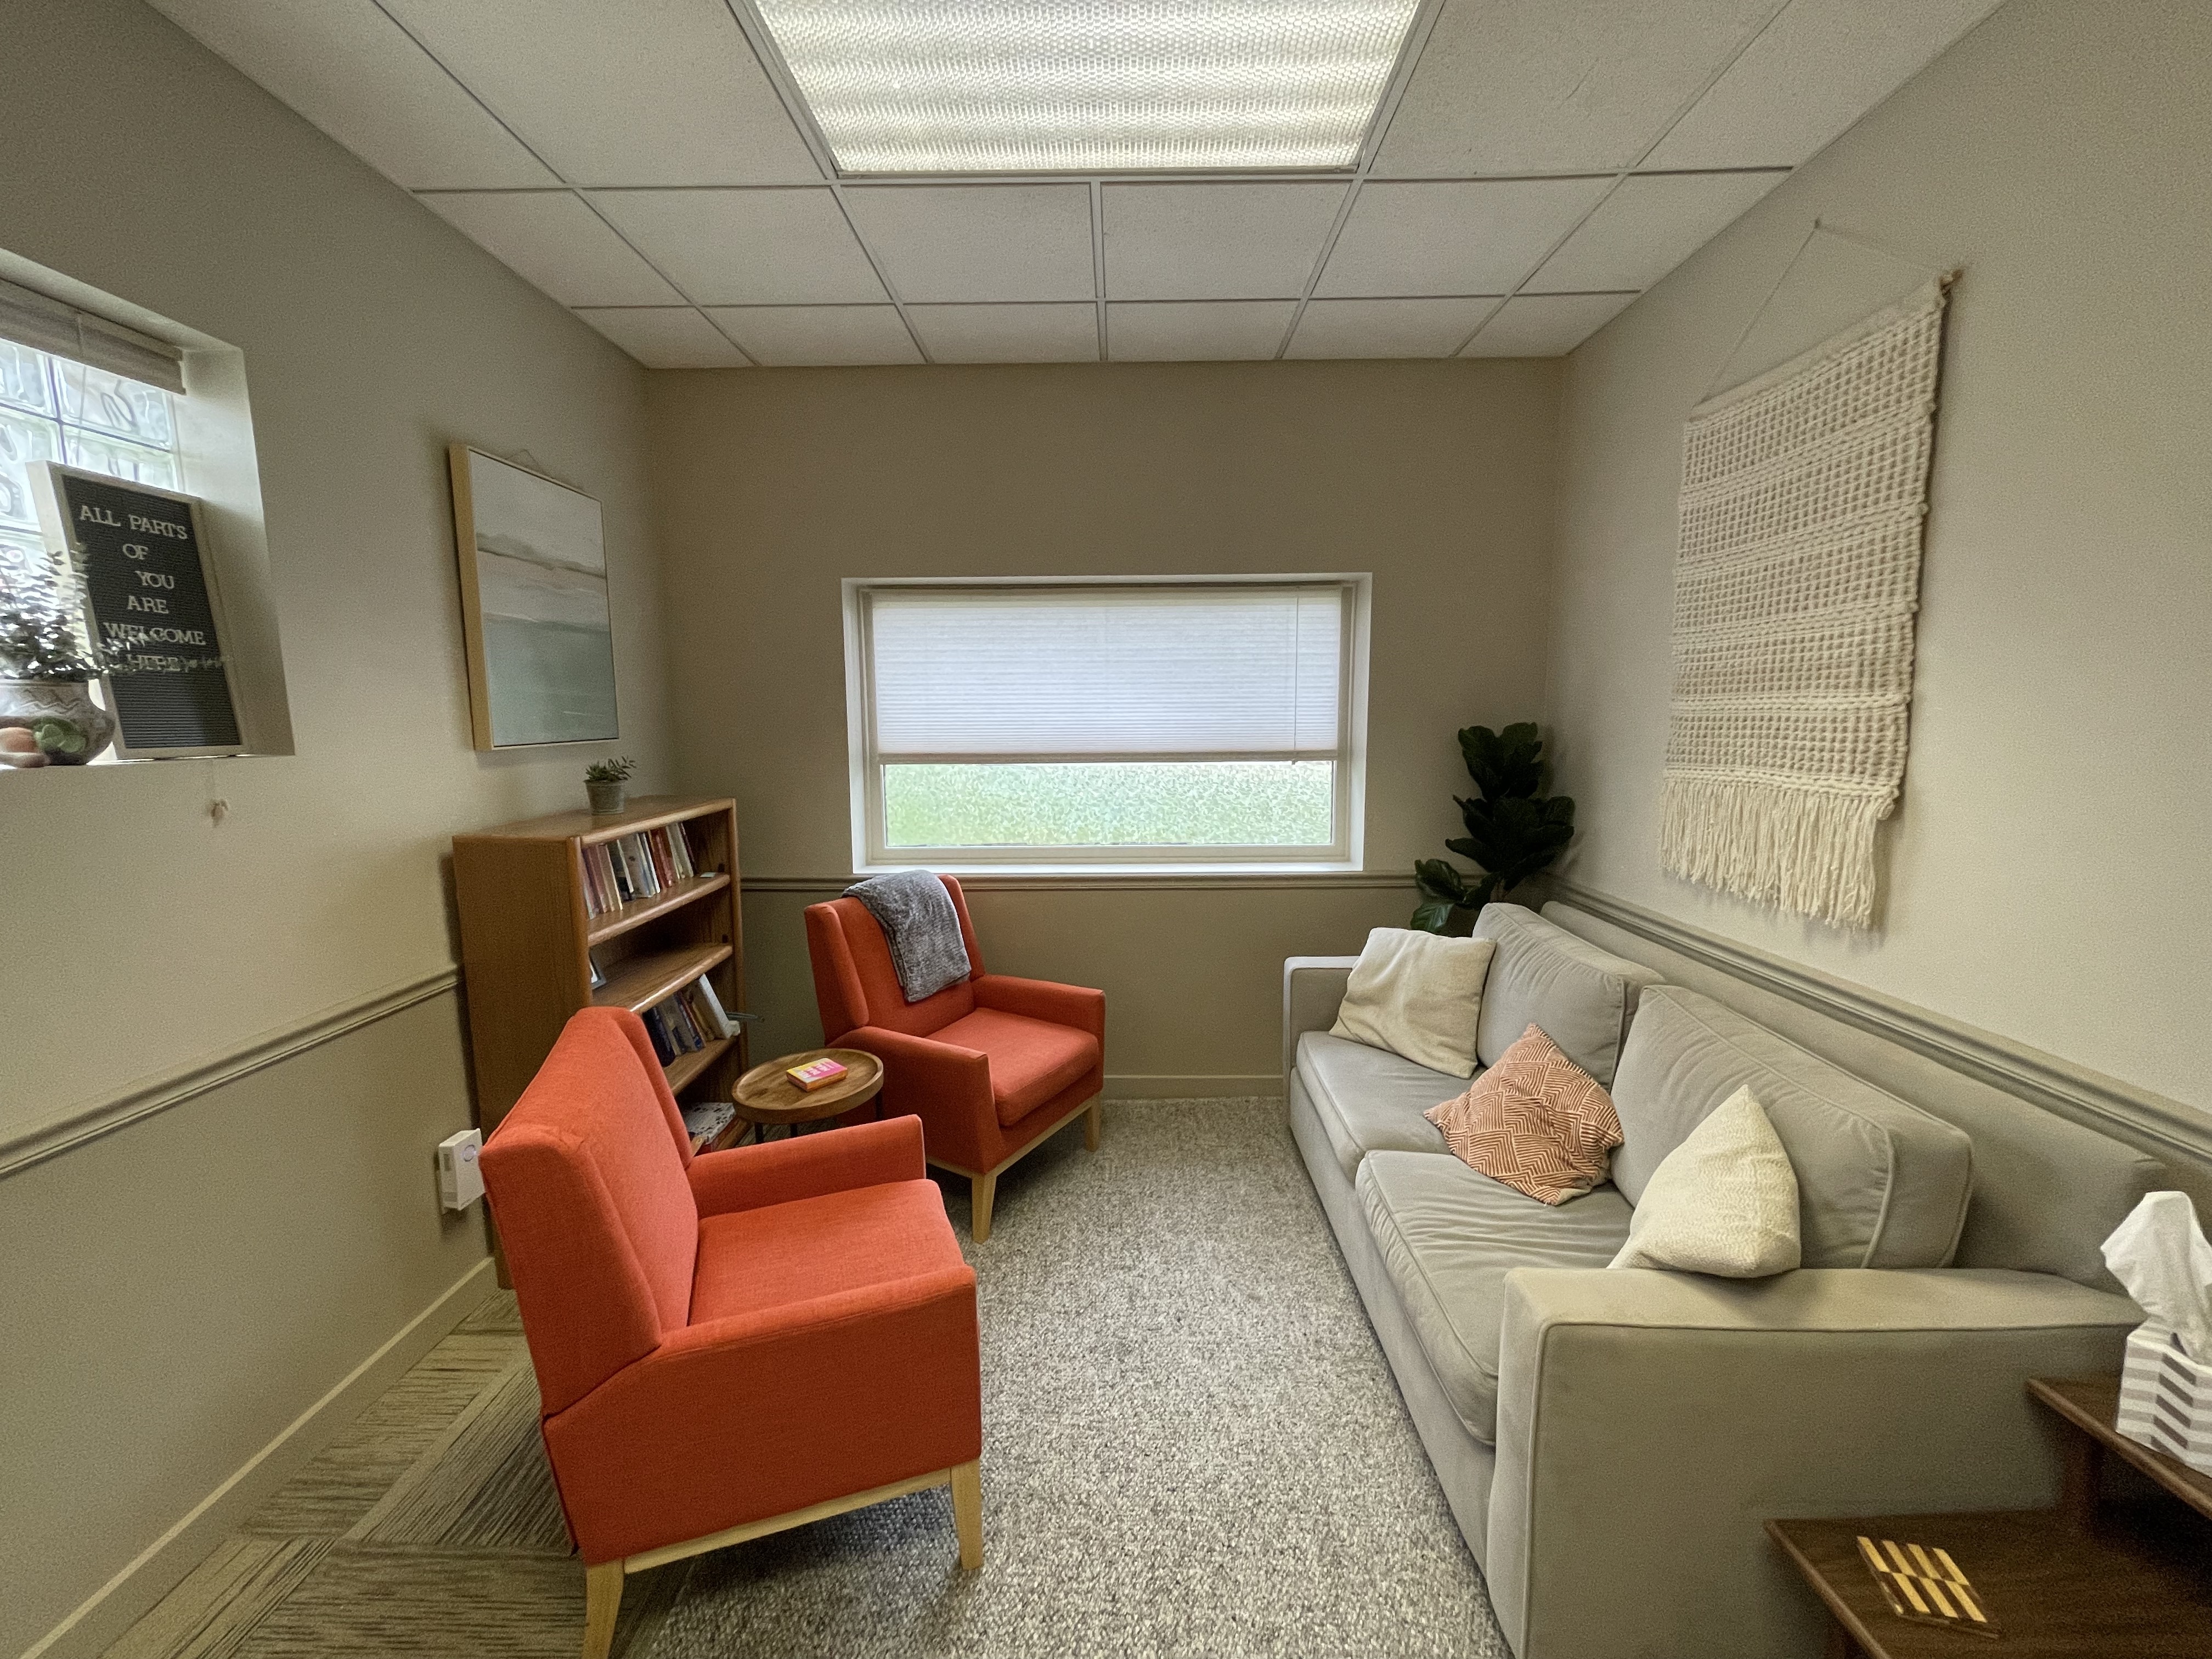 Image displays a traditional therapist office. On the right of the images is a beige couch, and on the left includes two orange armchairs with a table in the middle.